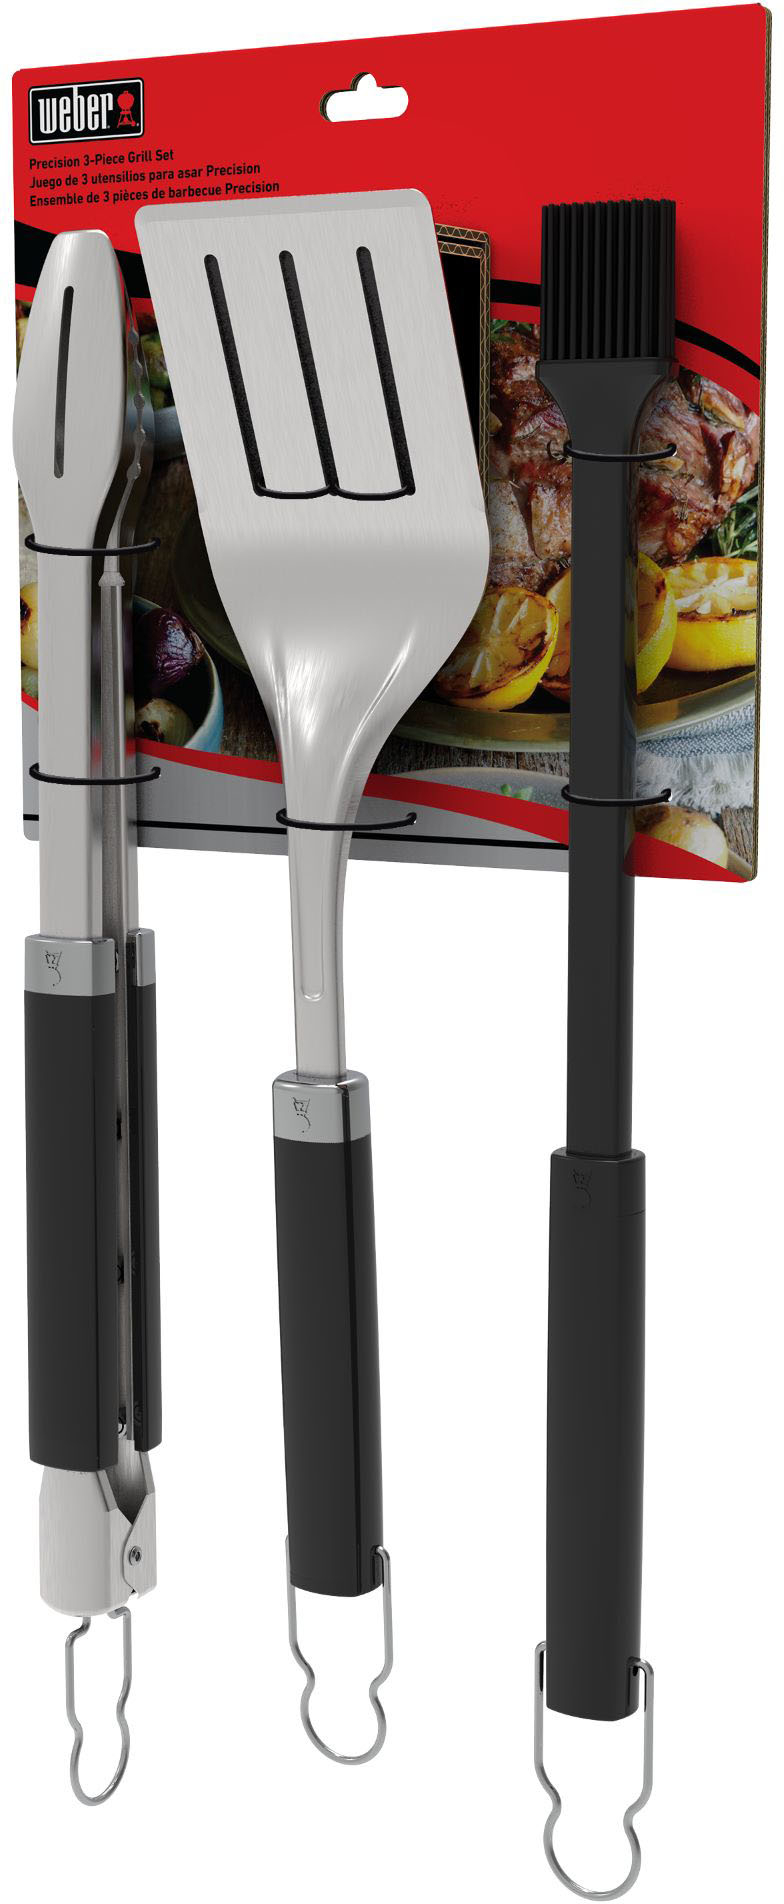 Weber Original Stainless Steel Three-Piece Barbecue Tool Set